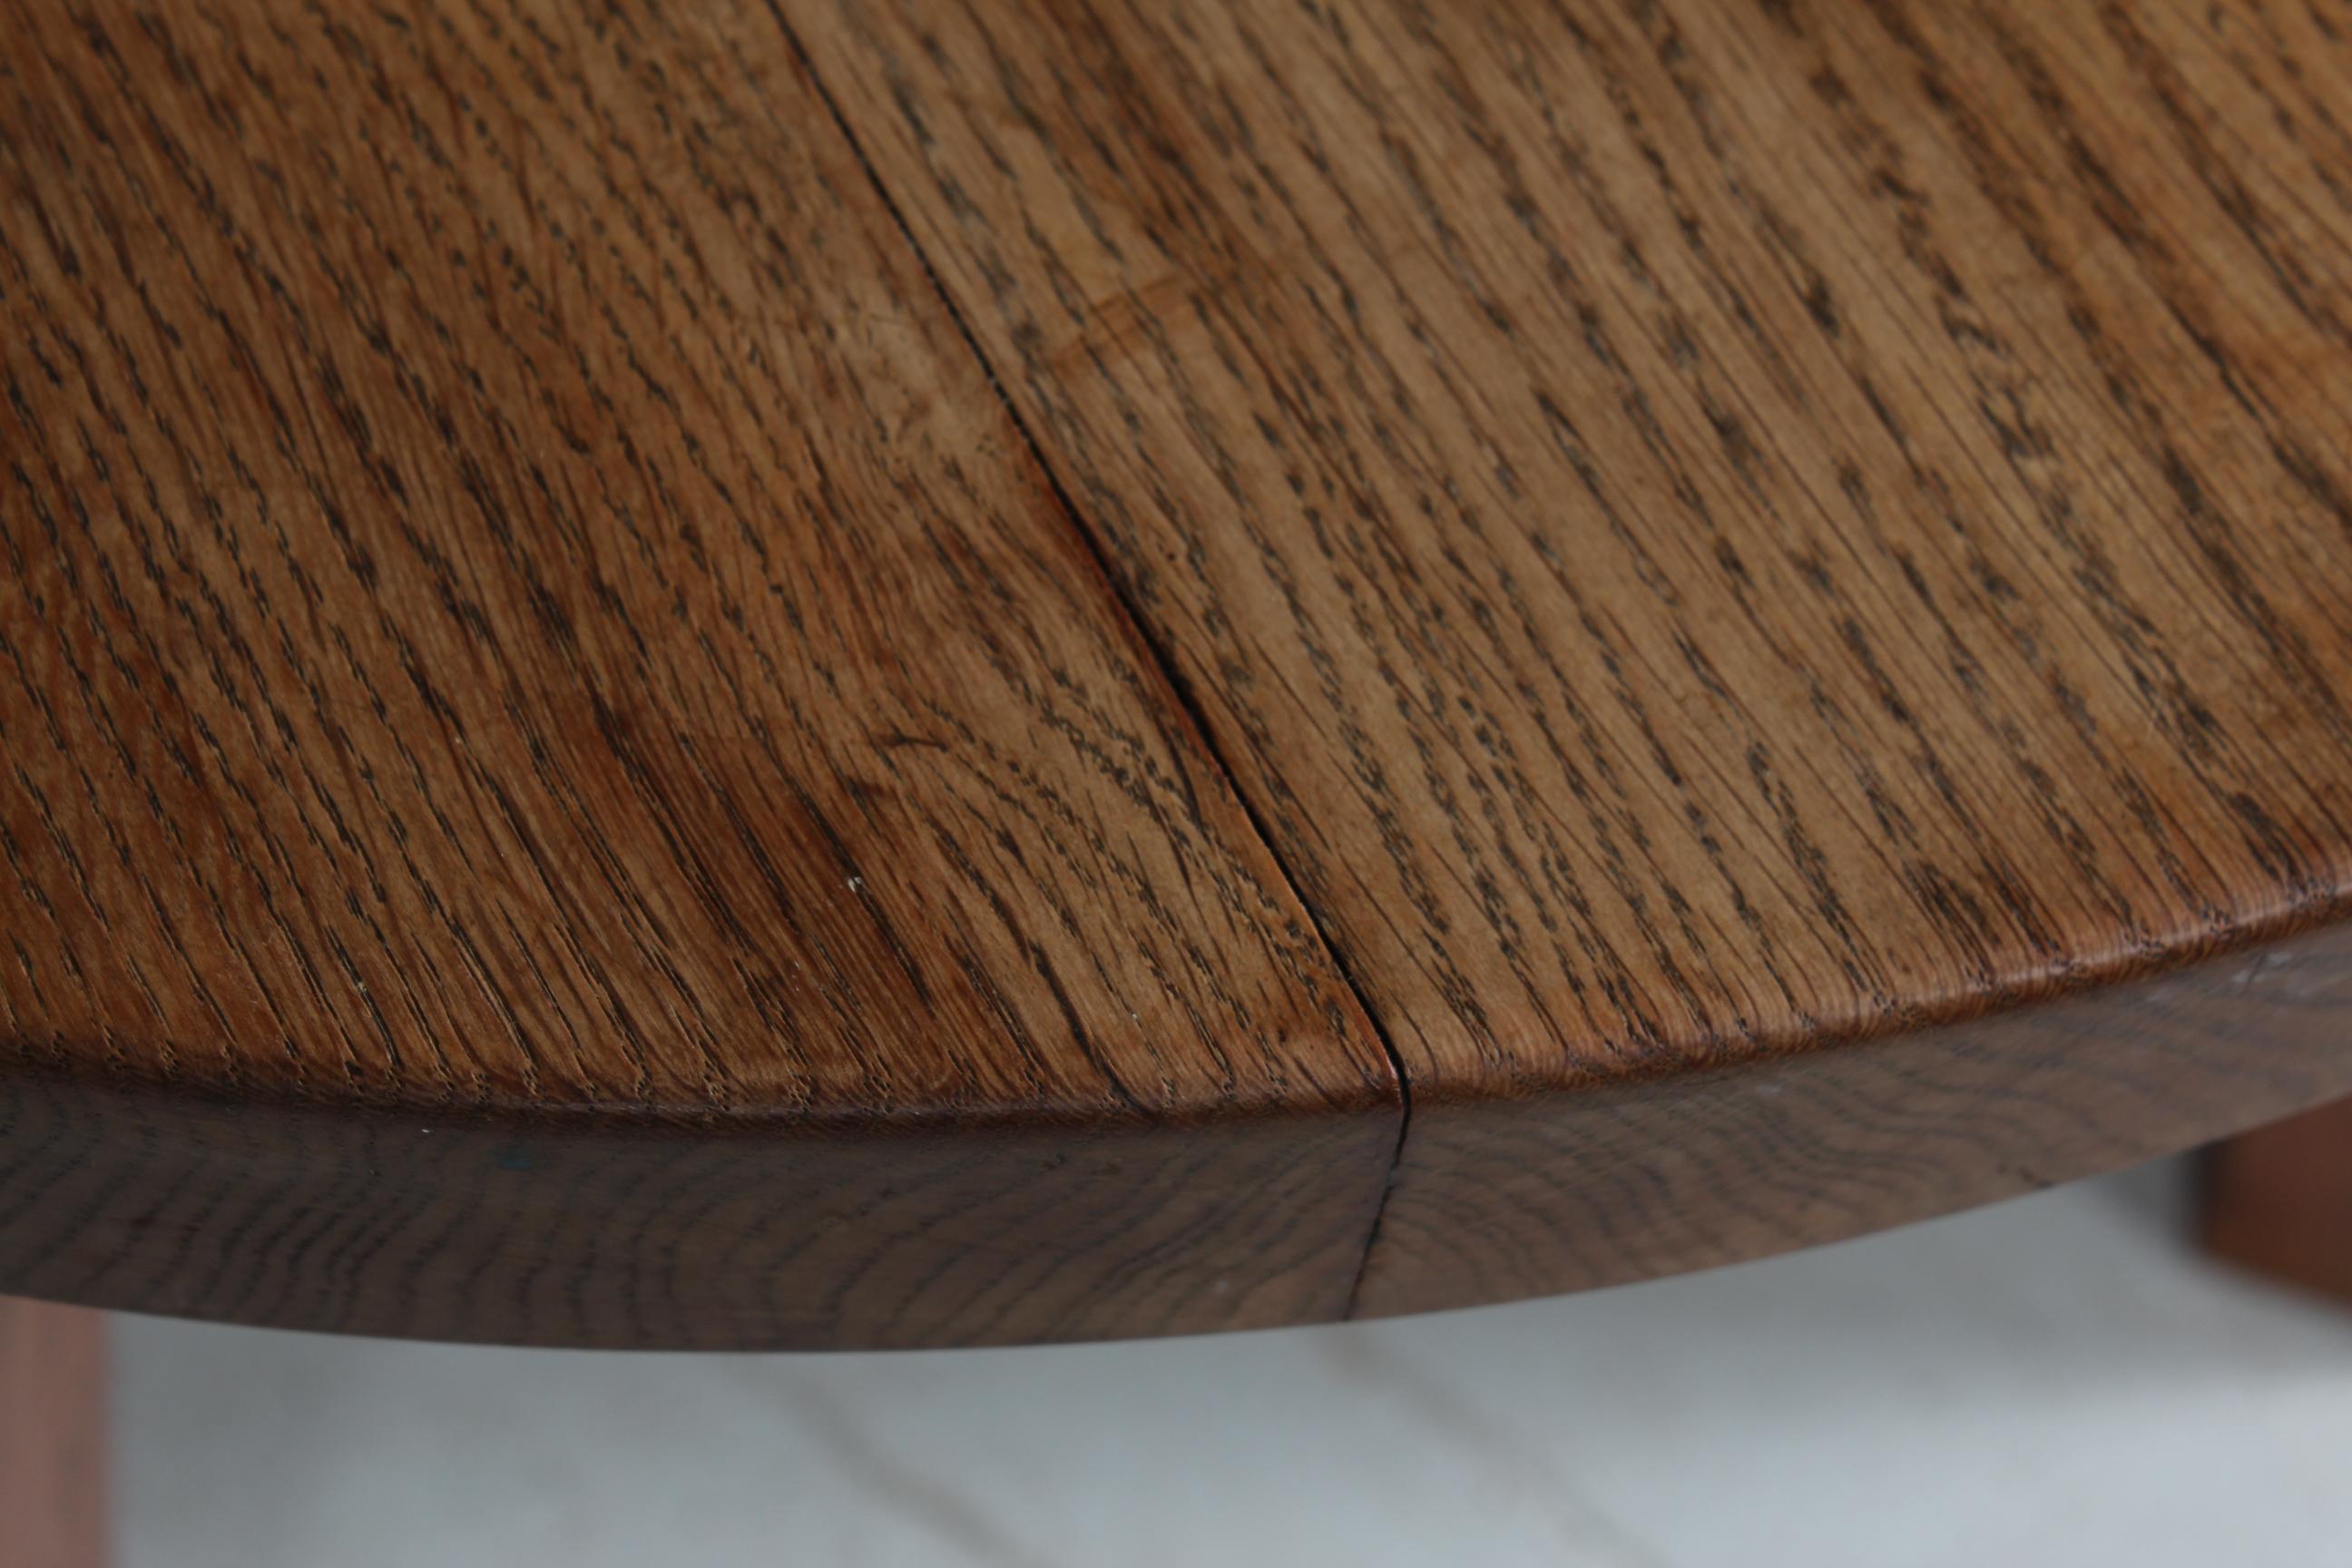 Danish Midcentury Brutalist Round Coffee Table of Solid Oak by Cabinetmaker 1950 For Sale 1